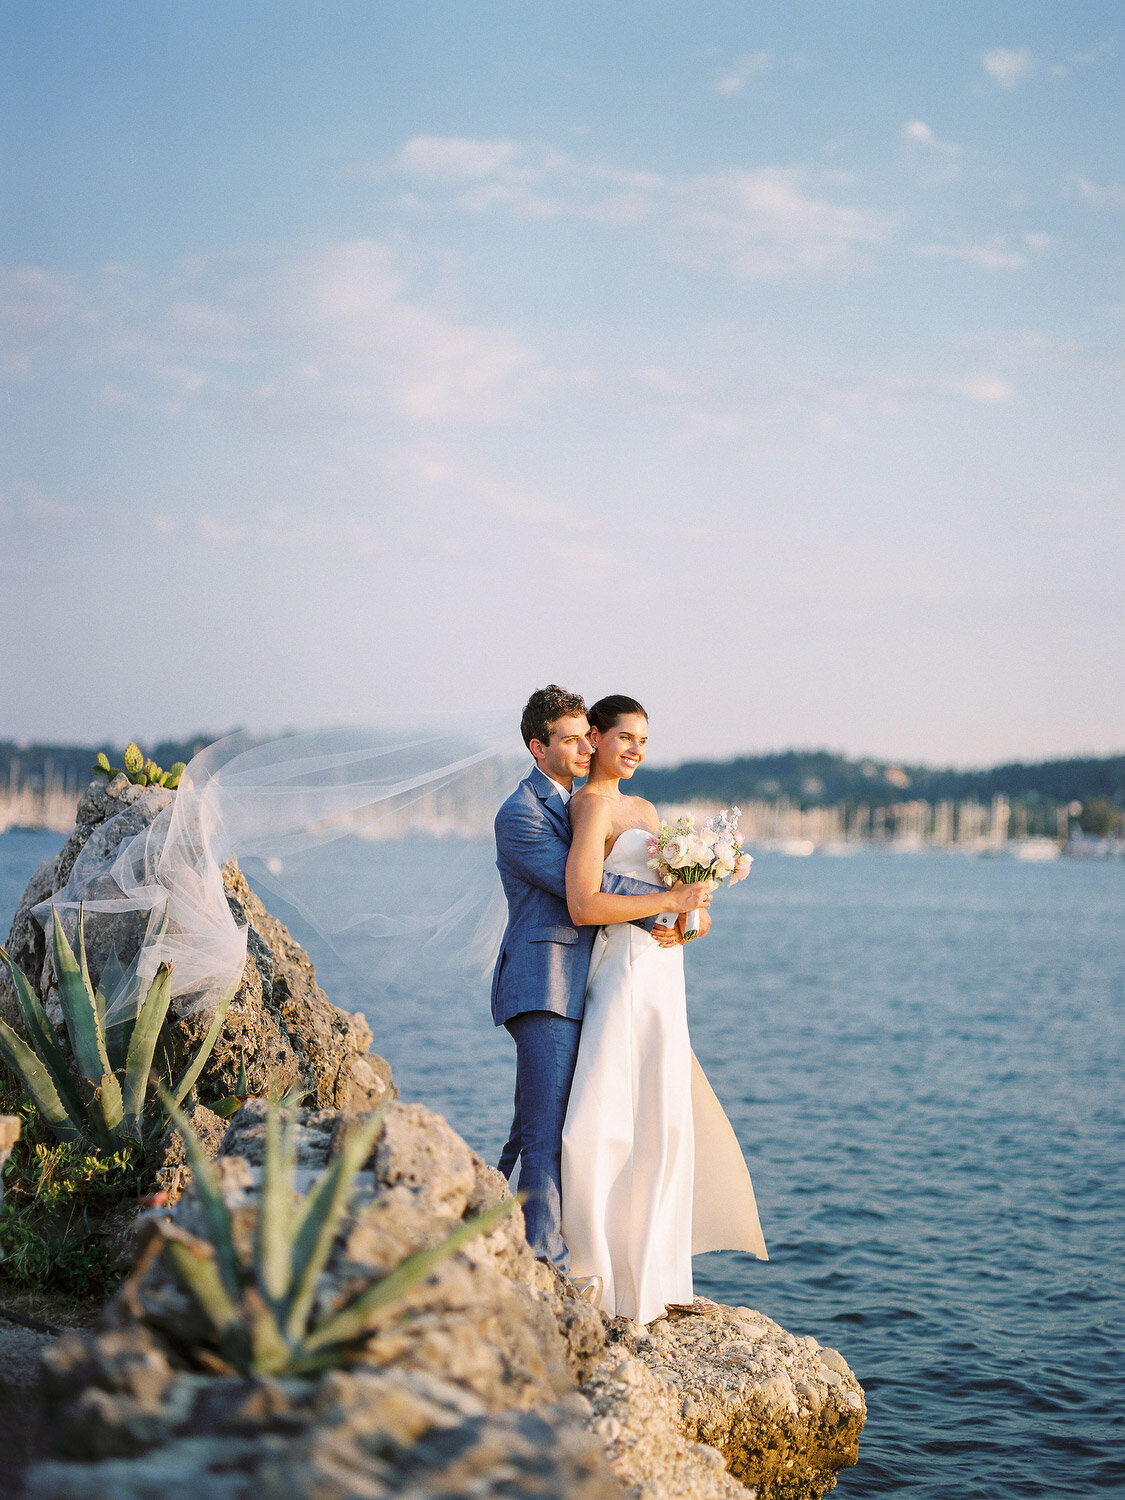 Greece-film-wedding-photography-by-Kostis-Mouselimis_071